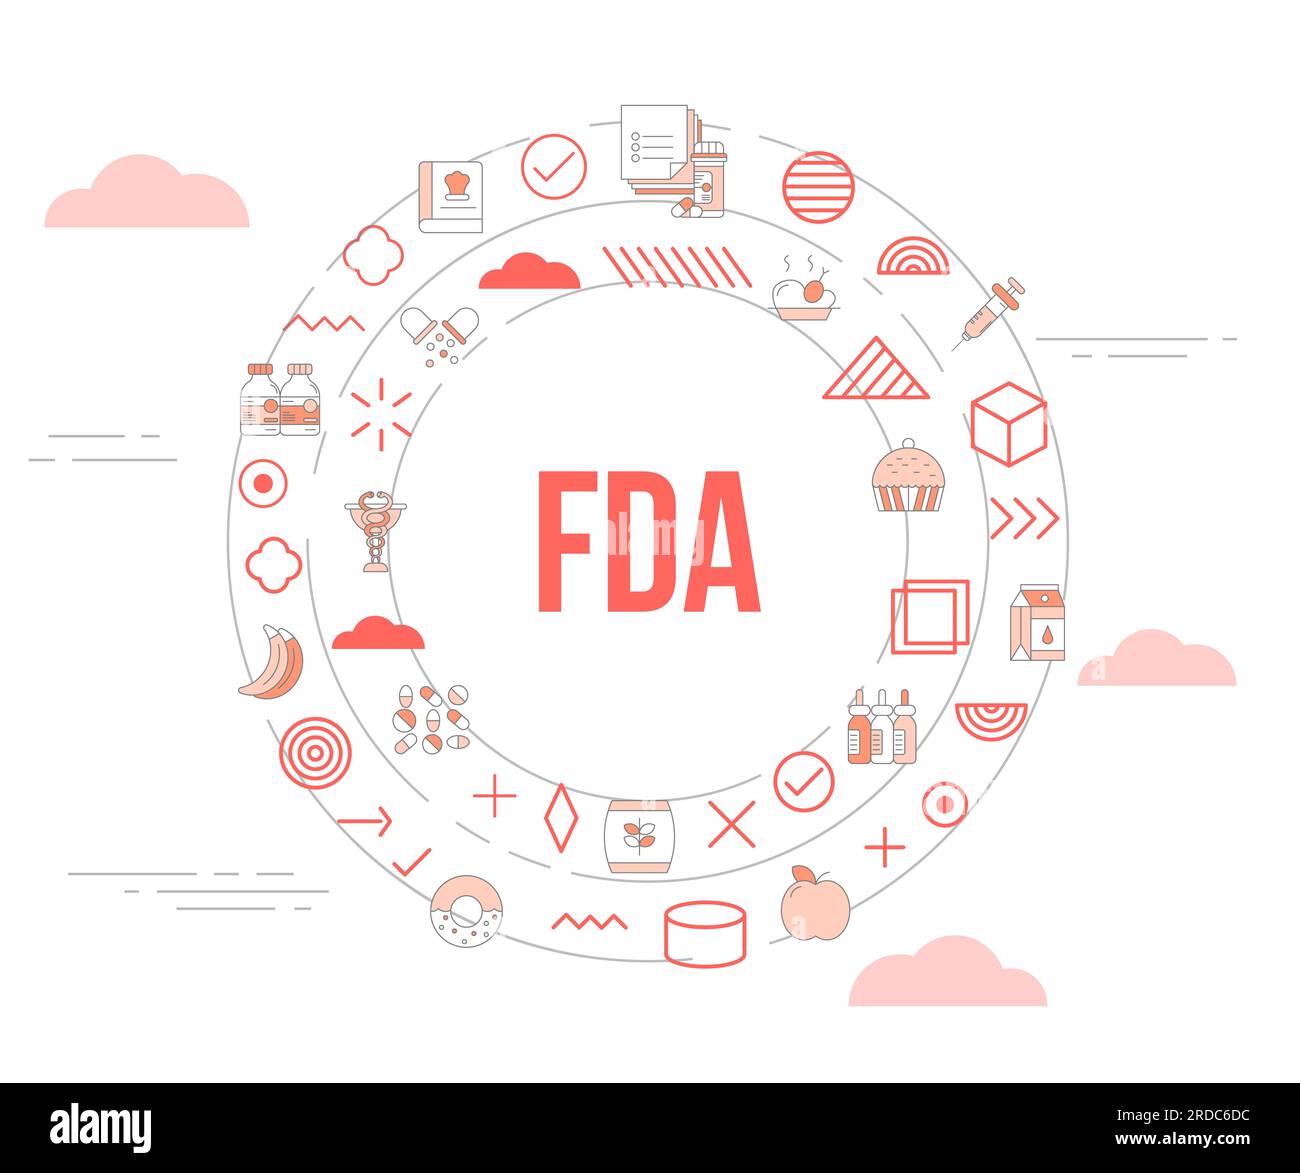 fda food and drug administration concept with icon set template banner and circle round shape vector illustration Stock Photo